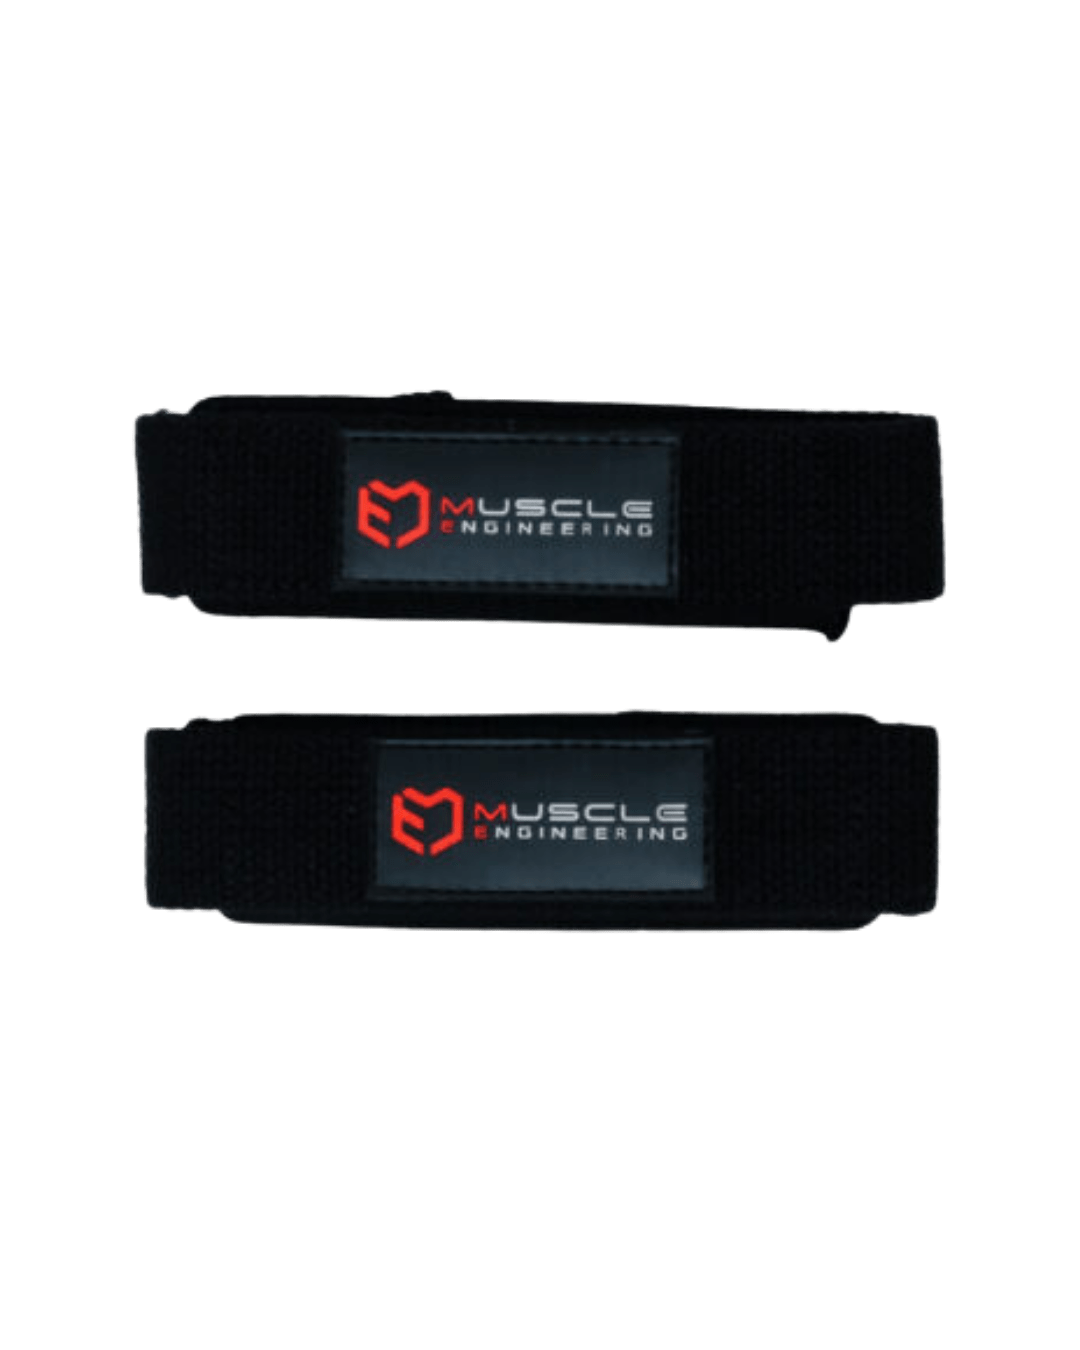 Muscle Engineering Fitness Accessory Get Strapped Power Bundle